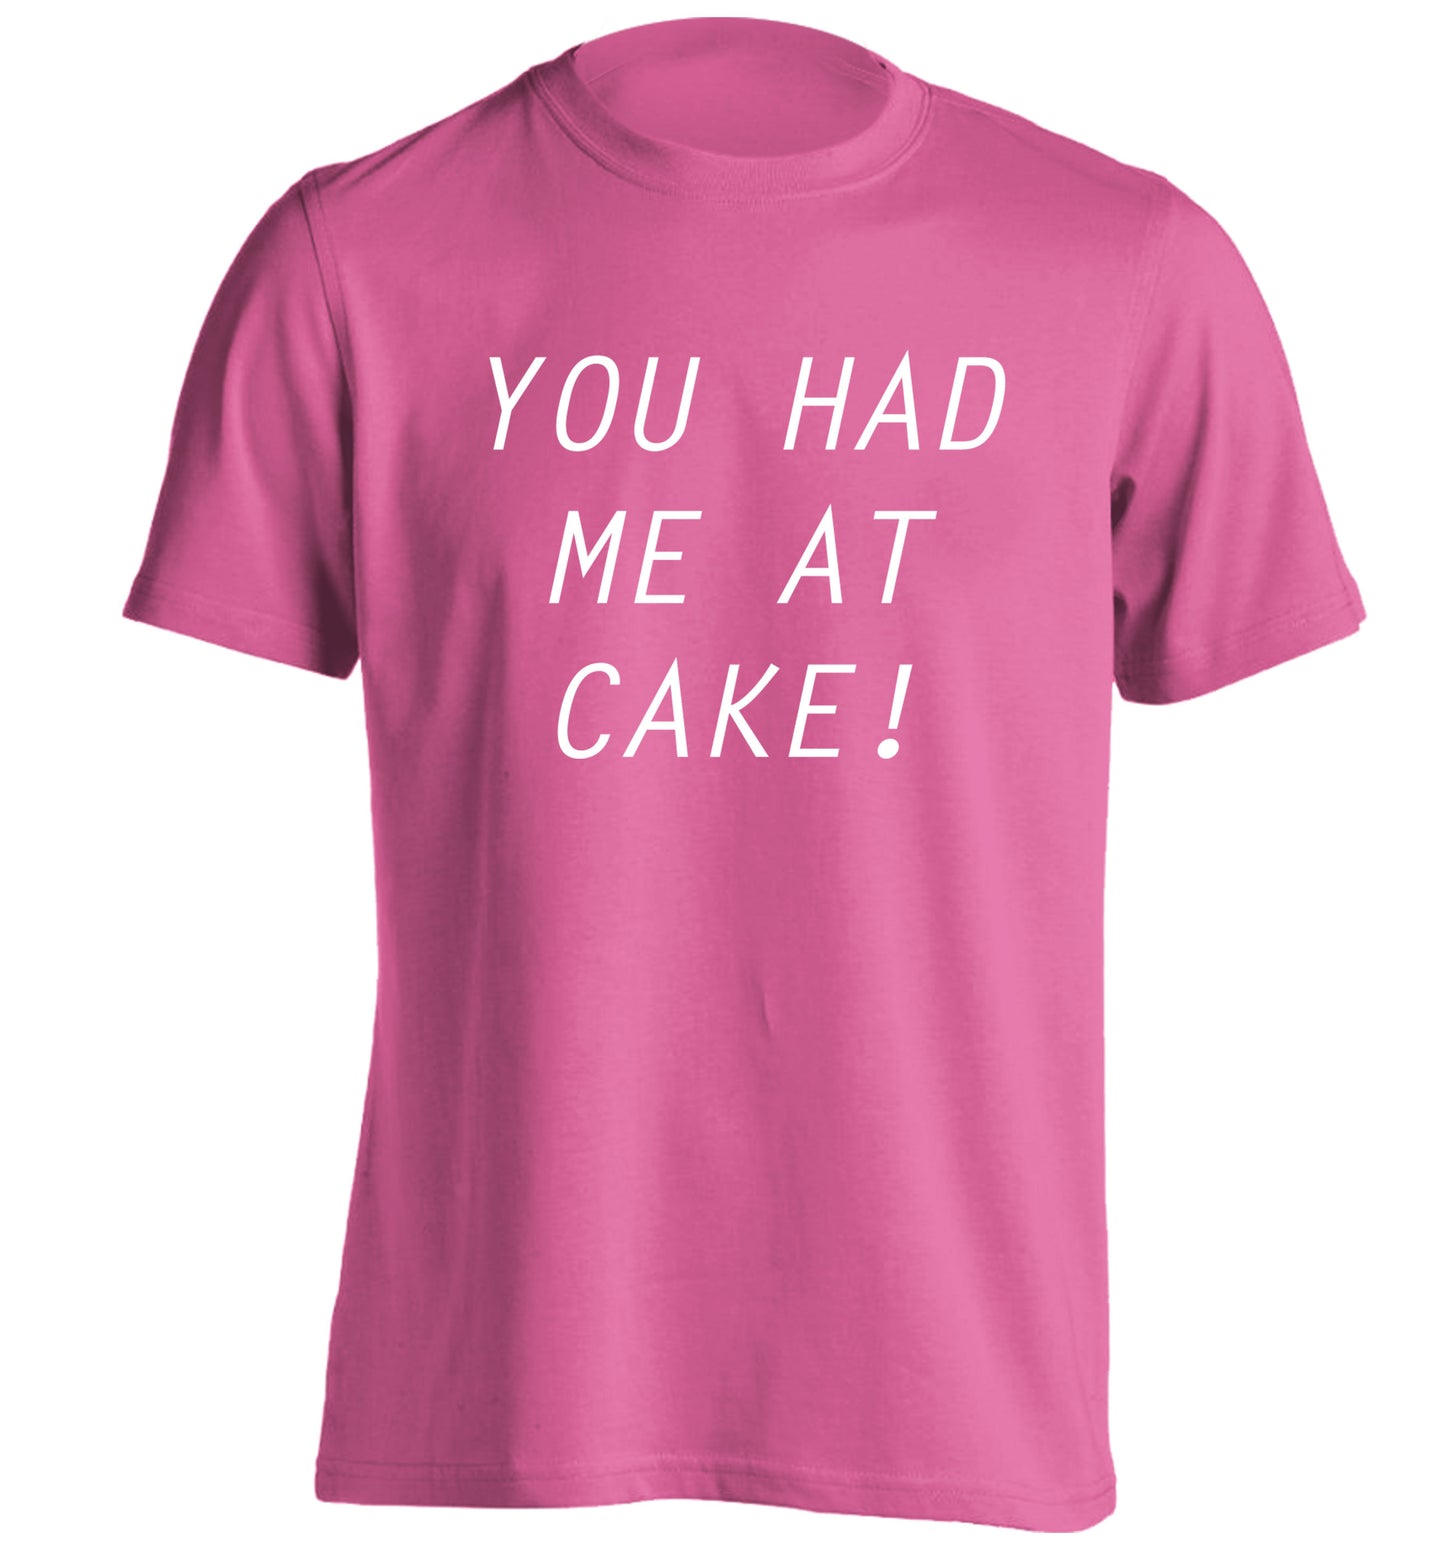 You had me at cake adults unisex pink Tshirt 2XL